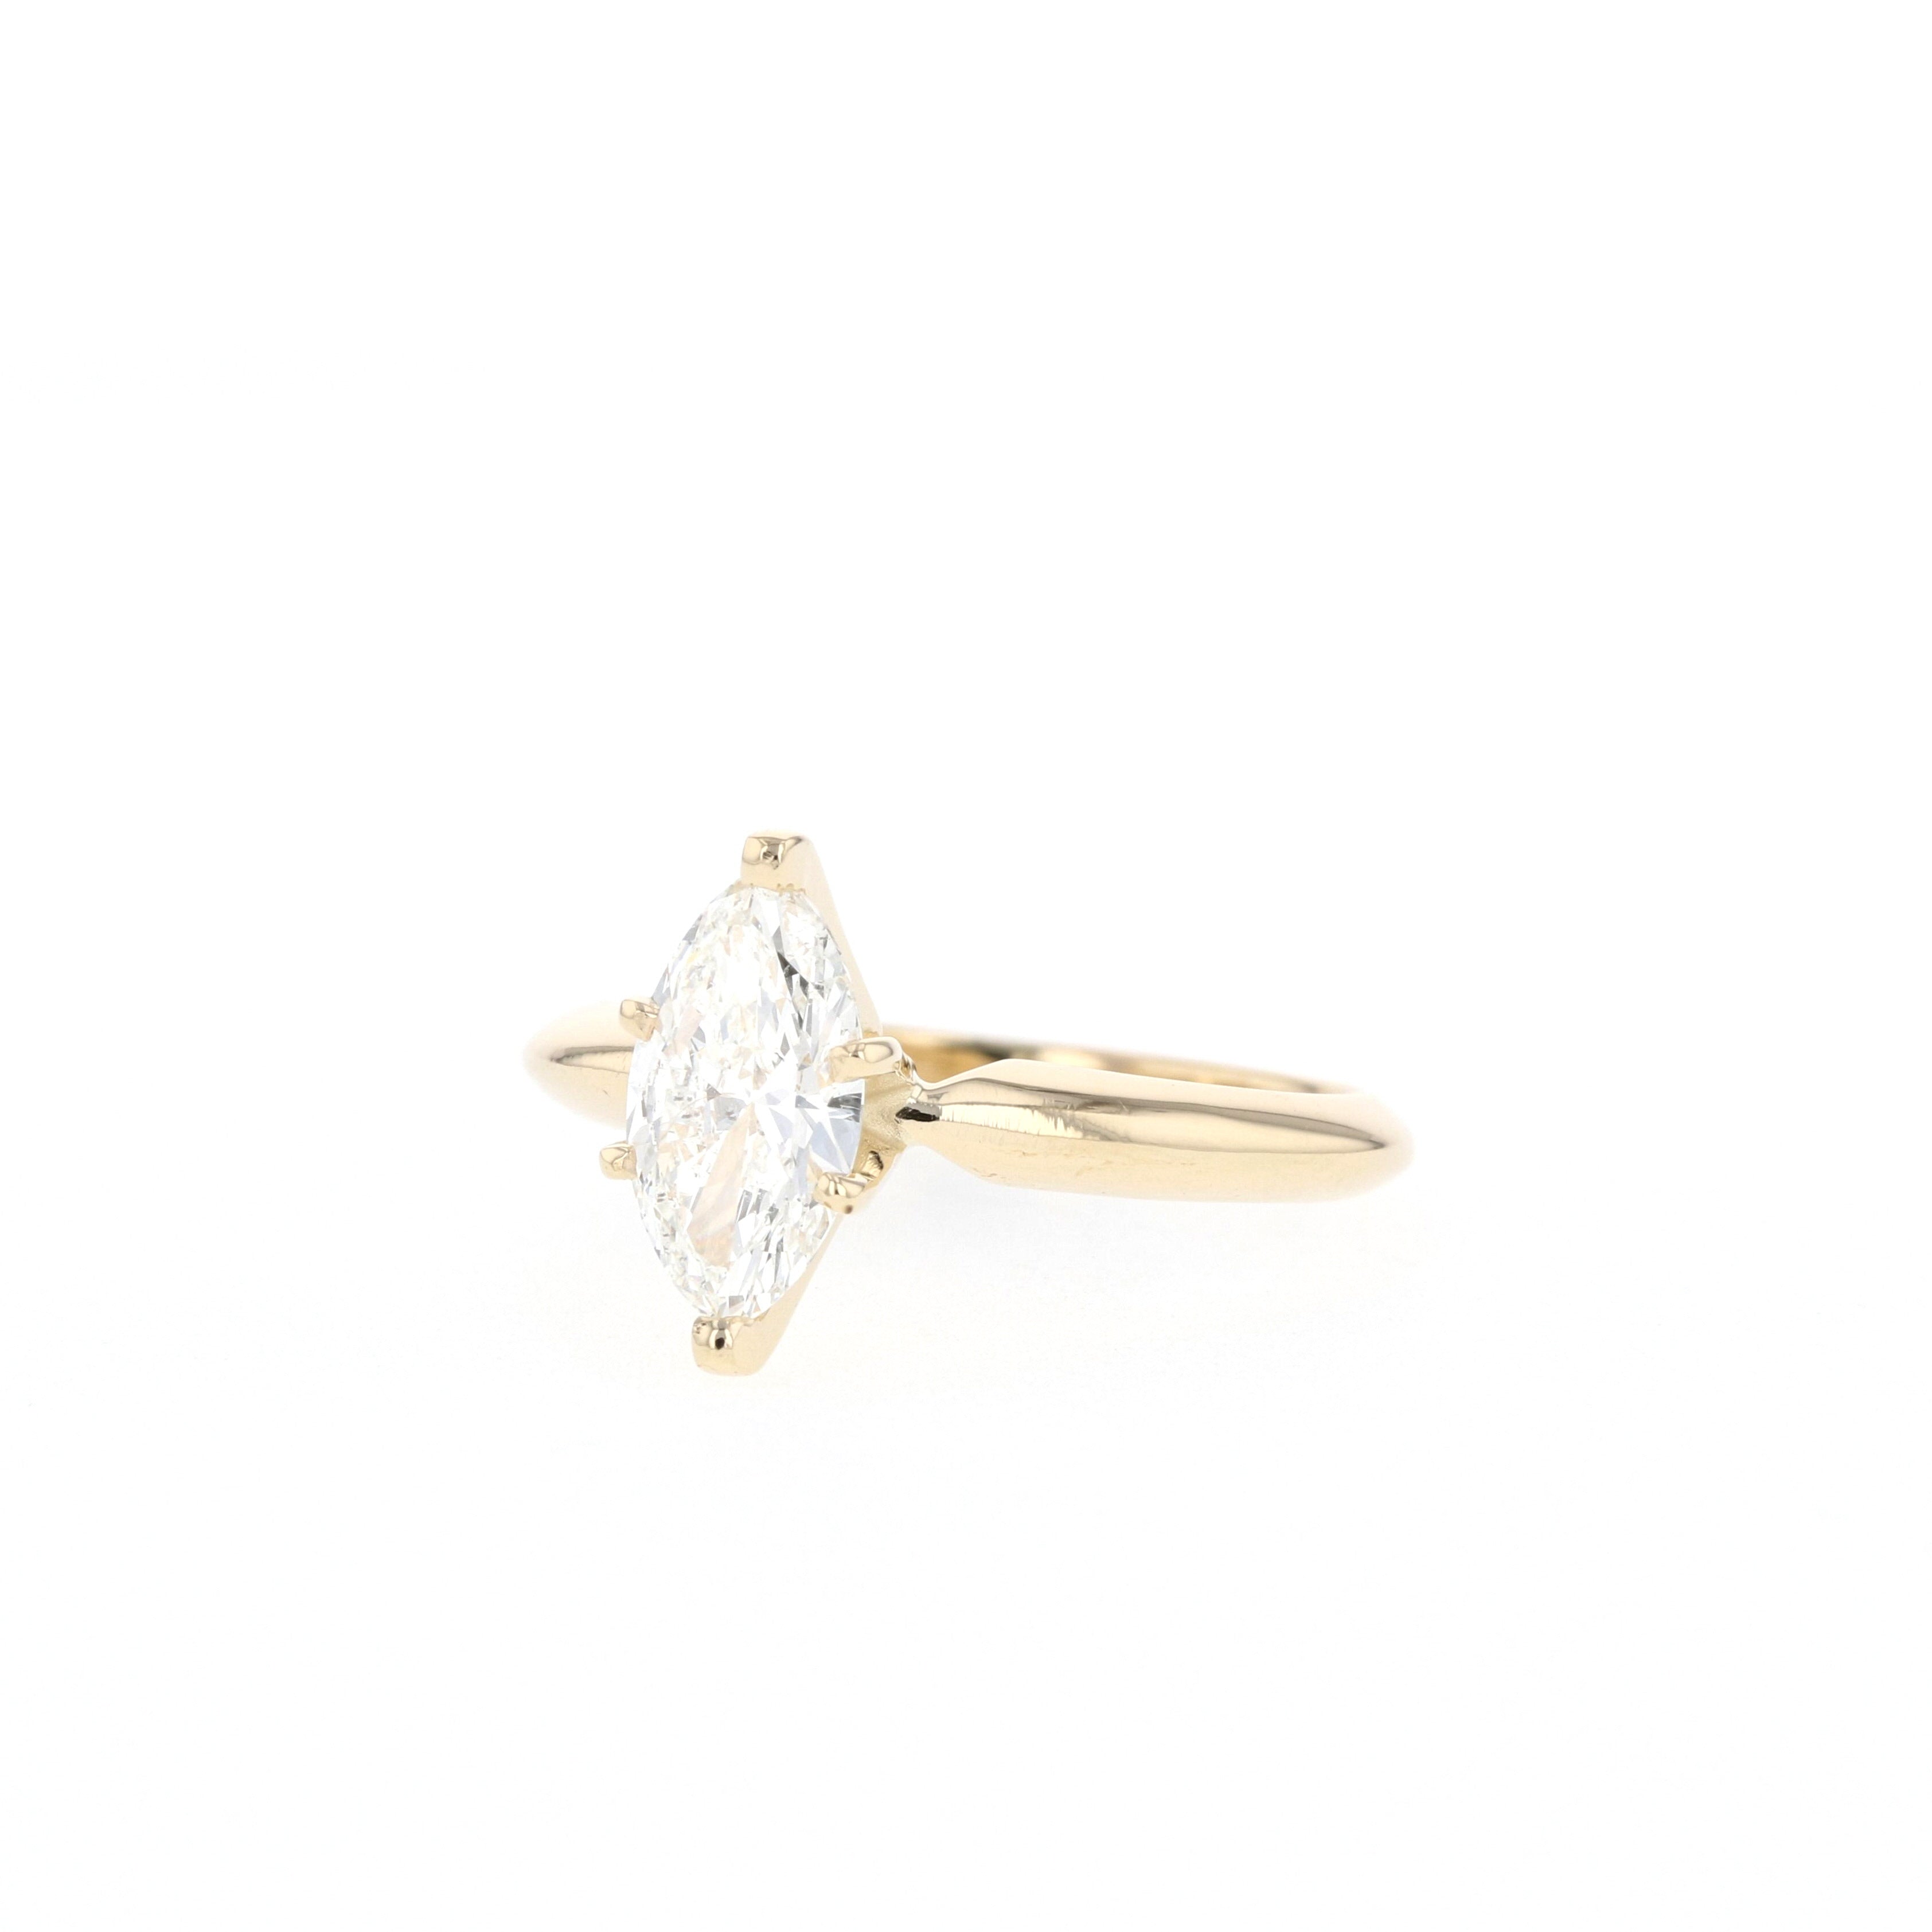 0.47-0.9 CT Marquise Cut Solitaire Moissanite Engagement Ring